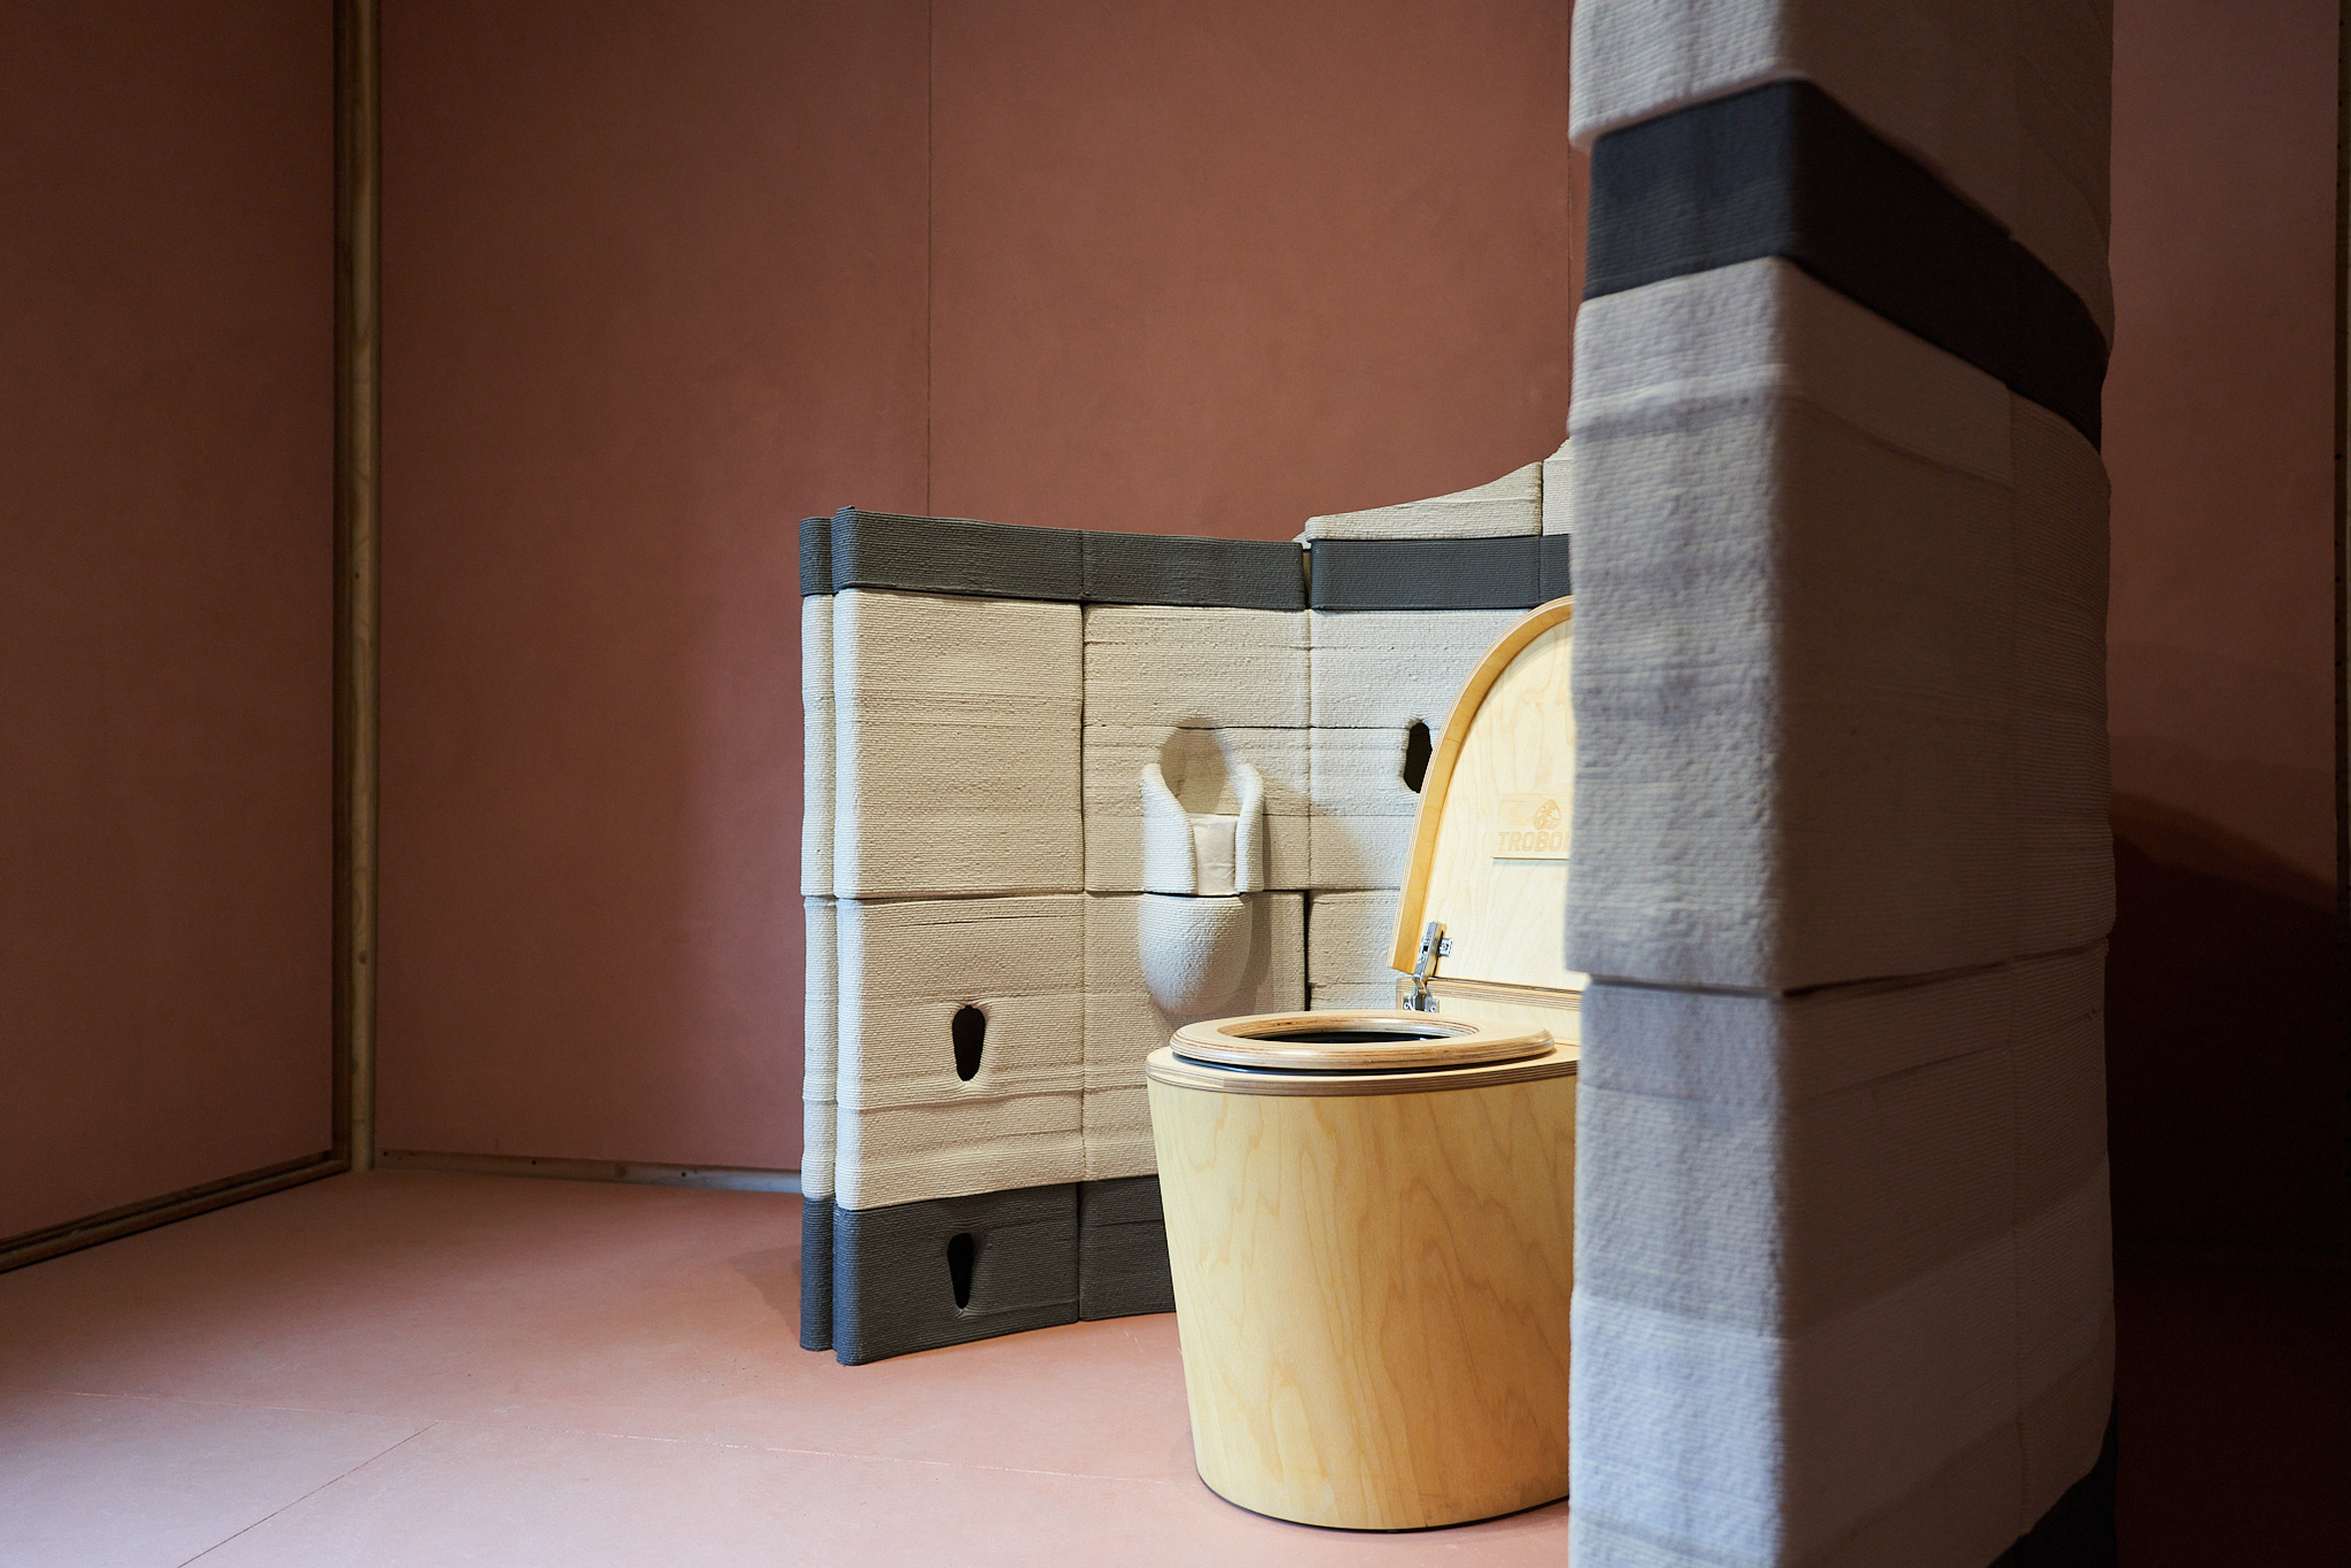 Toilet in biomaterials house by Biobased Creations